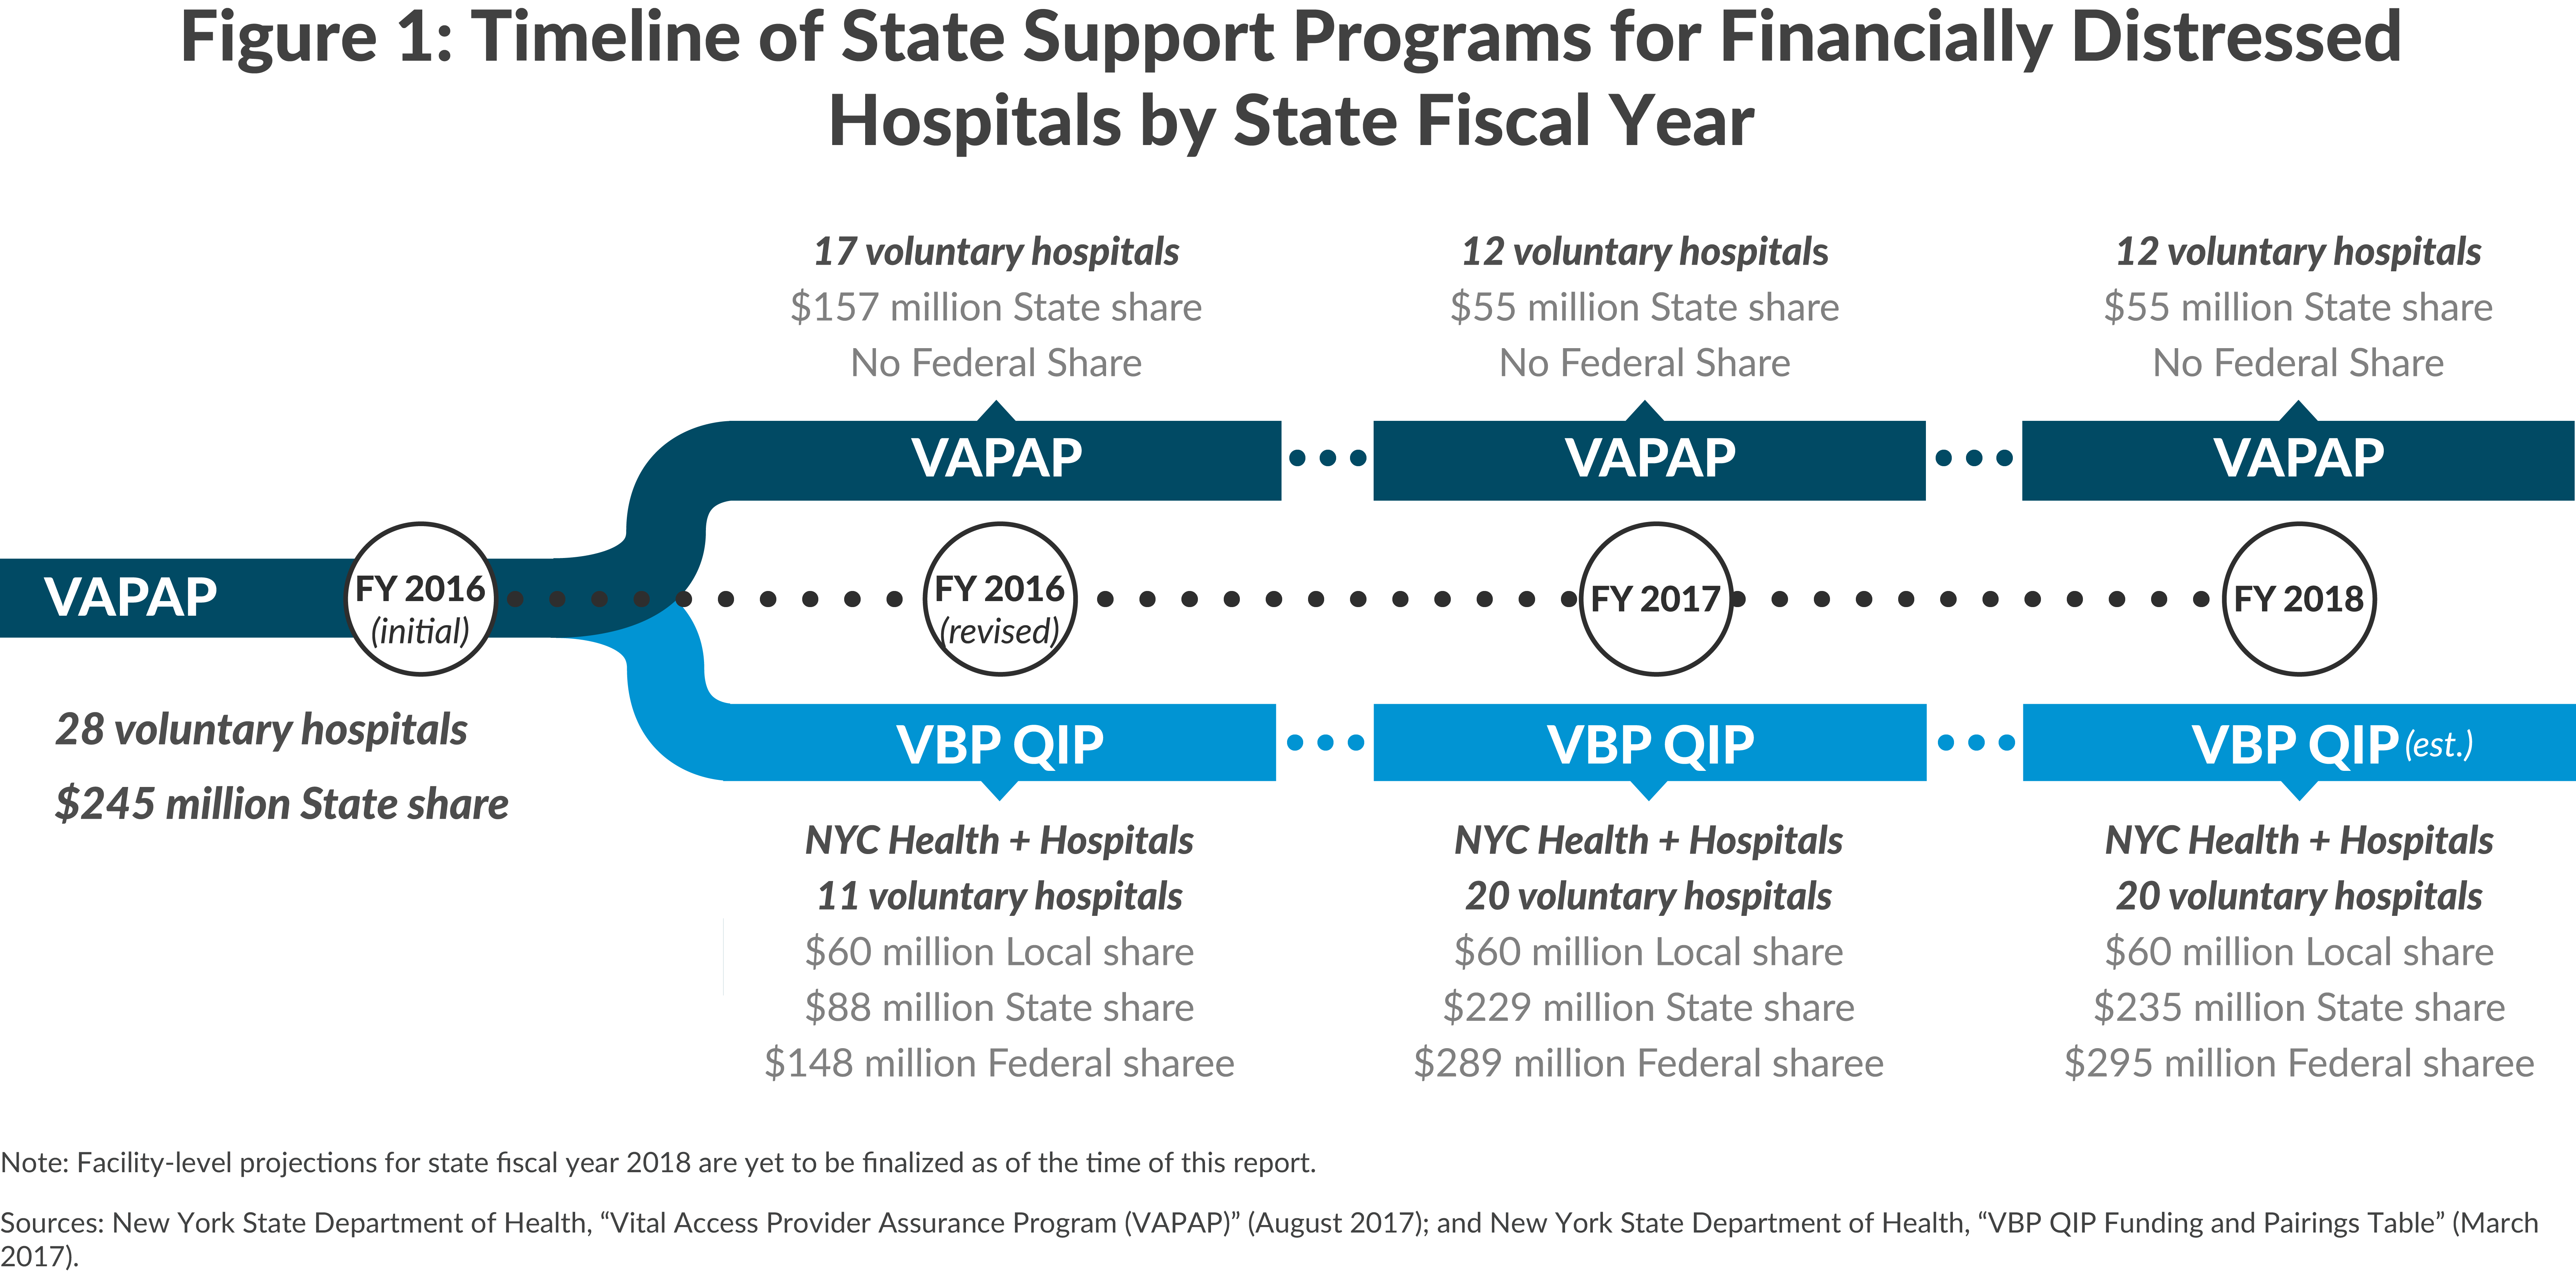 Figure 1: Timeline of State Support Programs for Financially Distressed Hospitals by State Fiscal Year